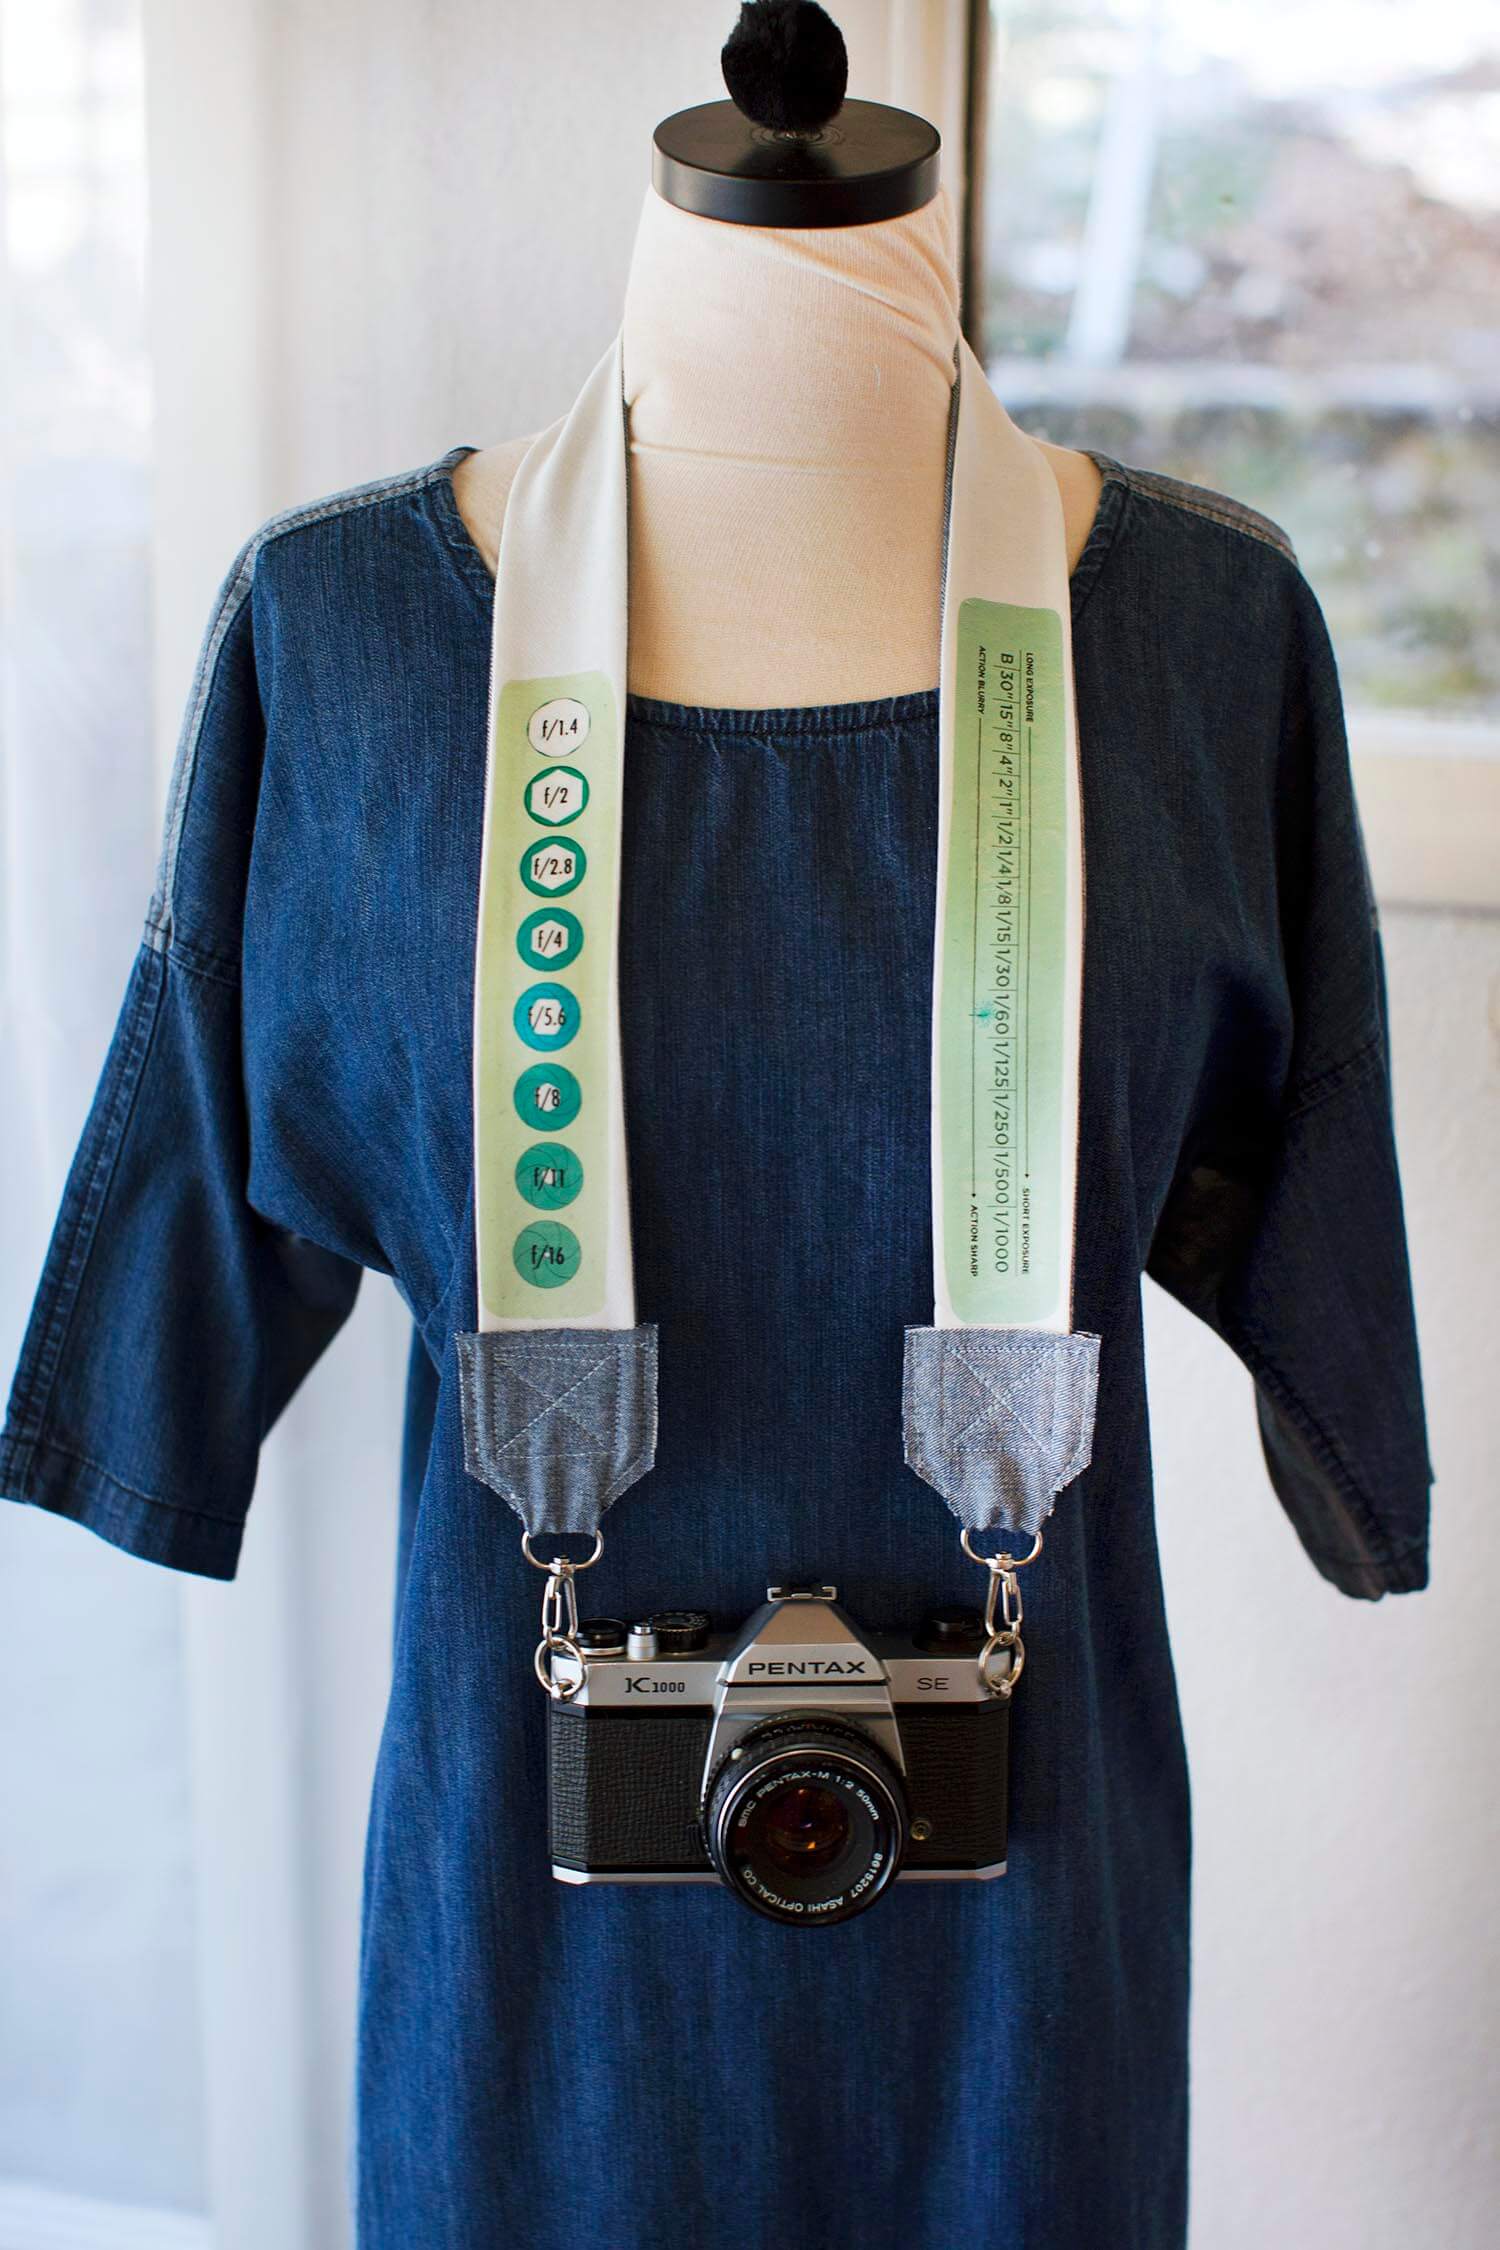 How to make your own camera strap